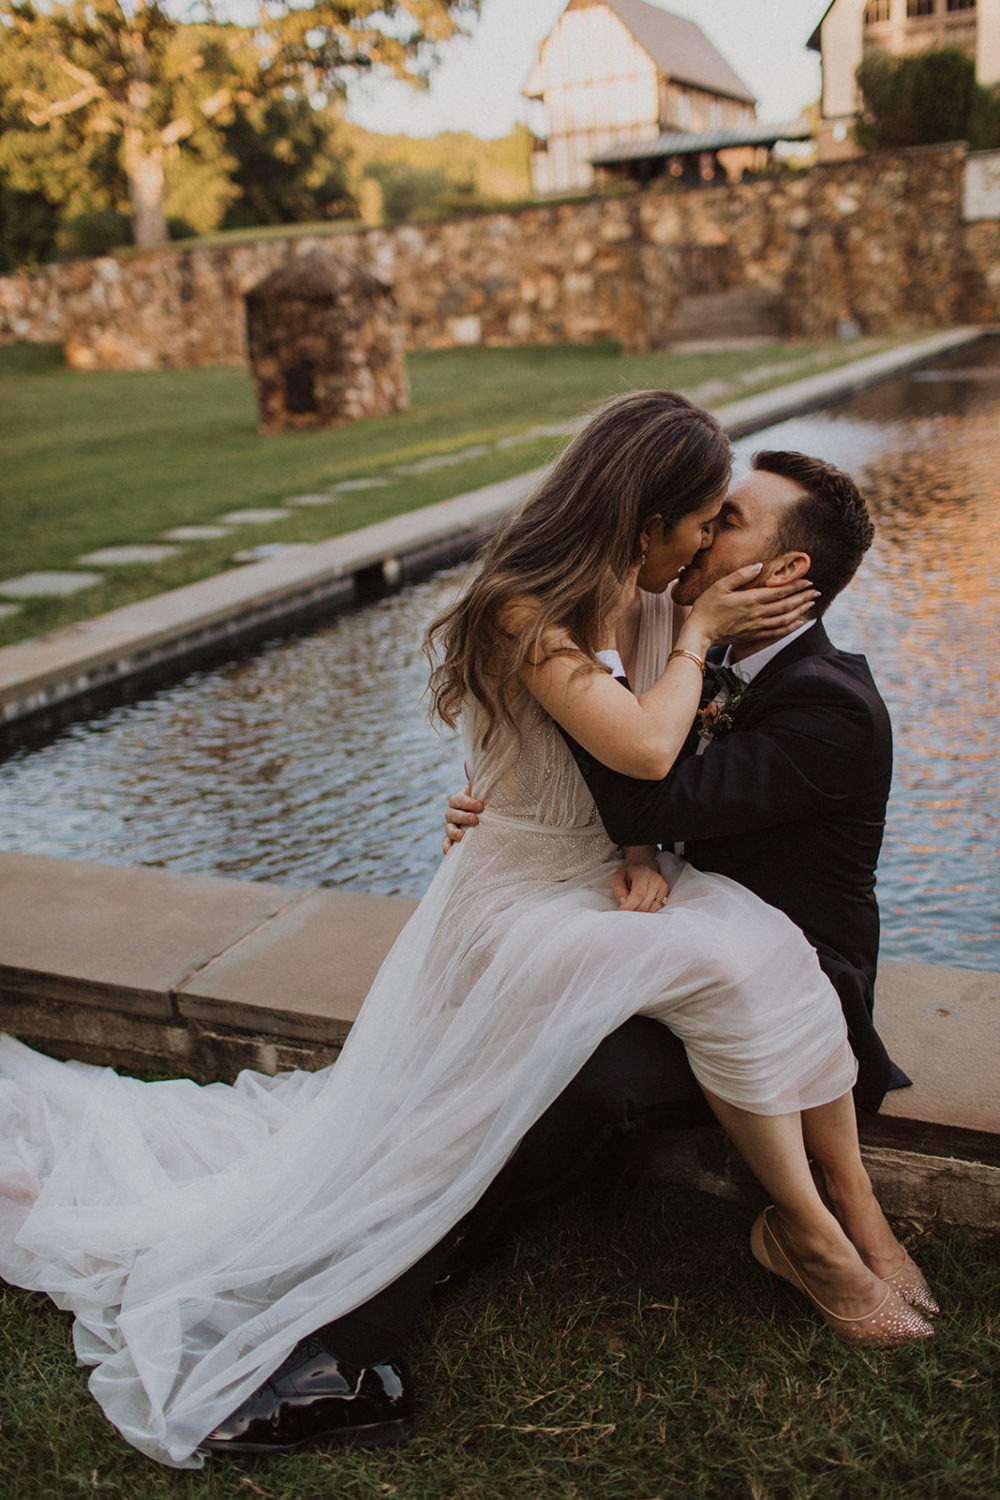 Bride sits on groom's lap and kisses outside by pool